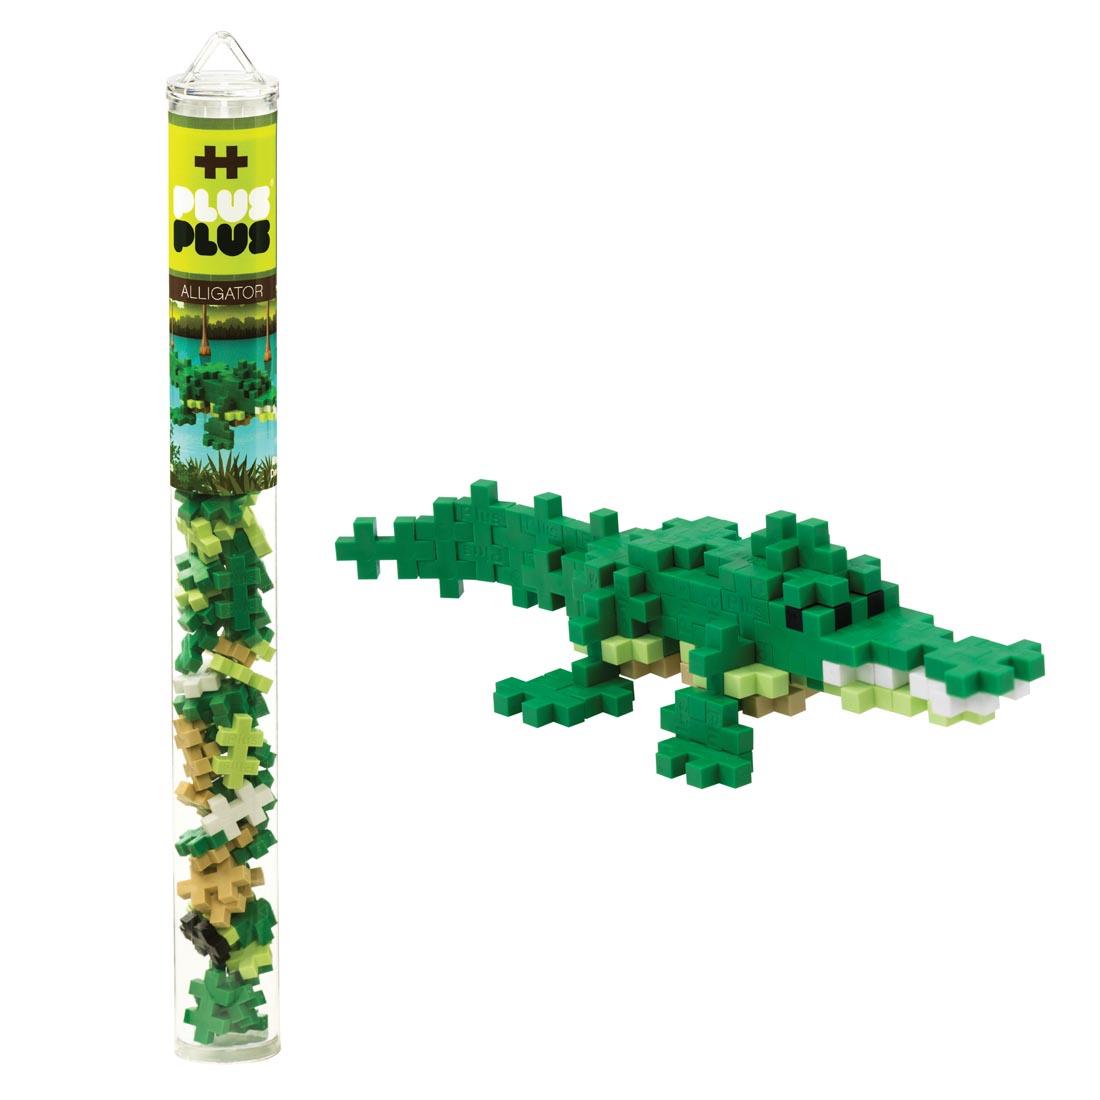 Plus-Plus 70-Piece Alligator Tube beside a completed sample creation